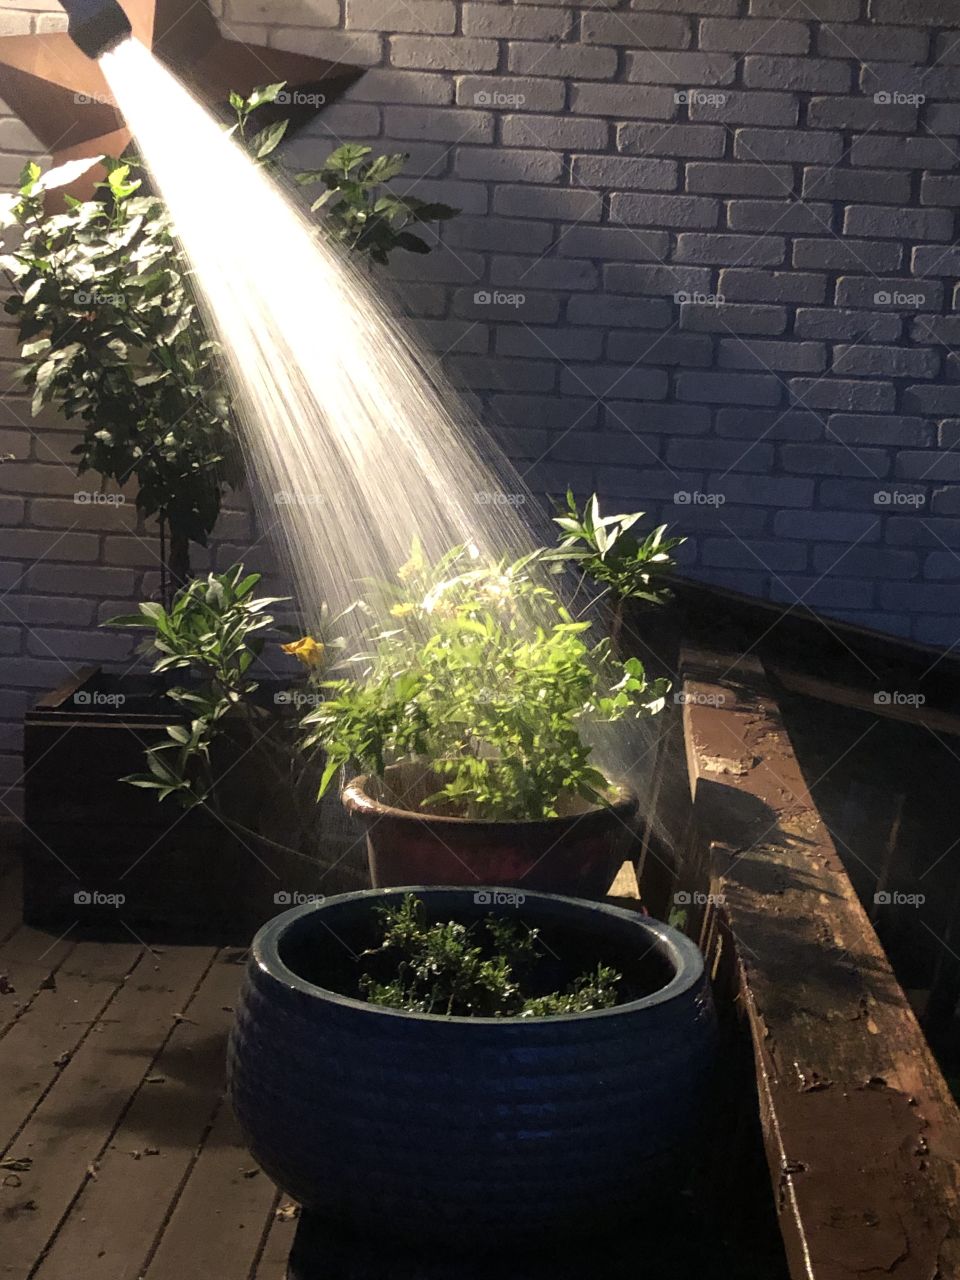 Nighttime plant watering with light and water spray